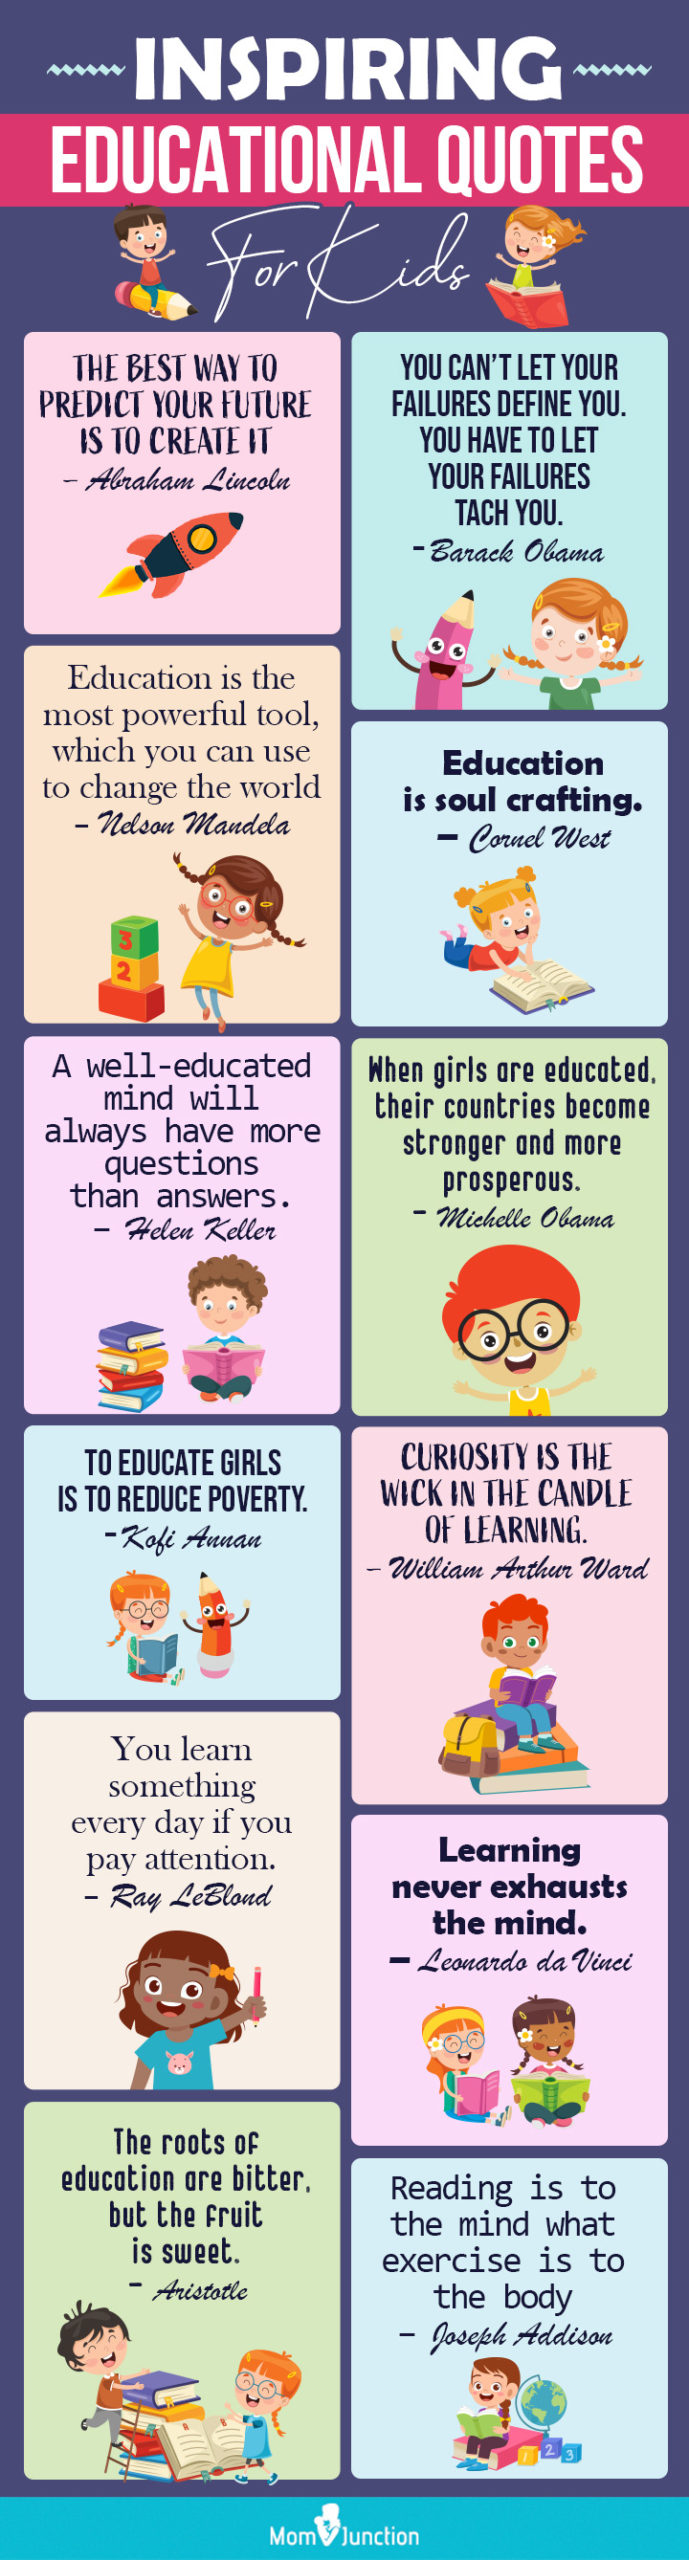 inspiring educational quotes for kids [Infographic]